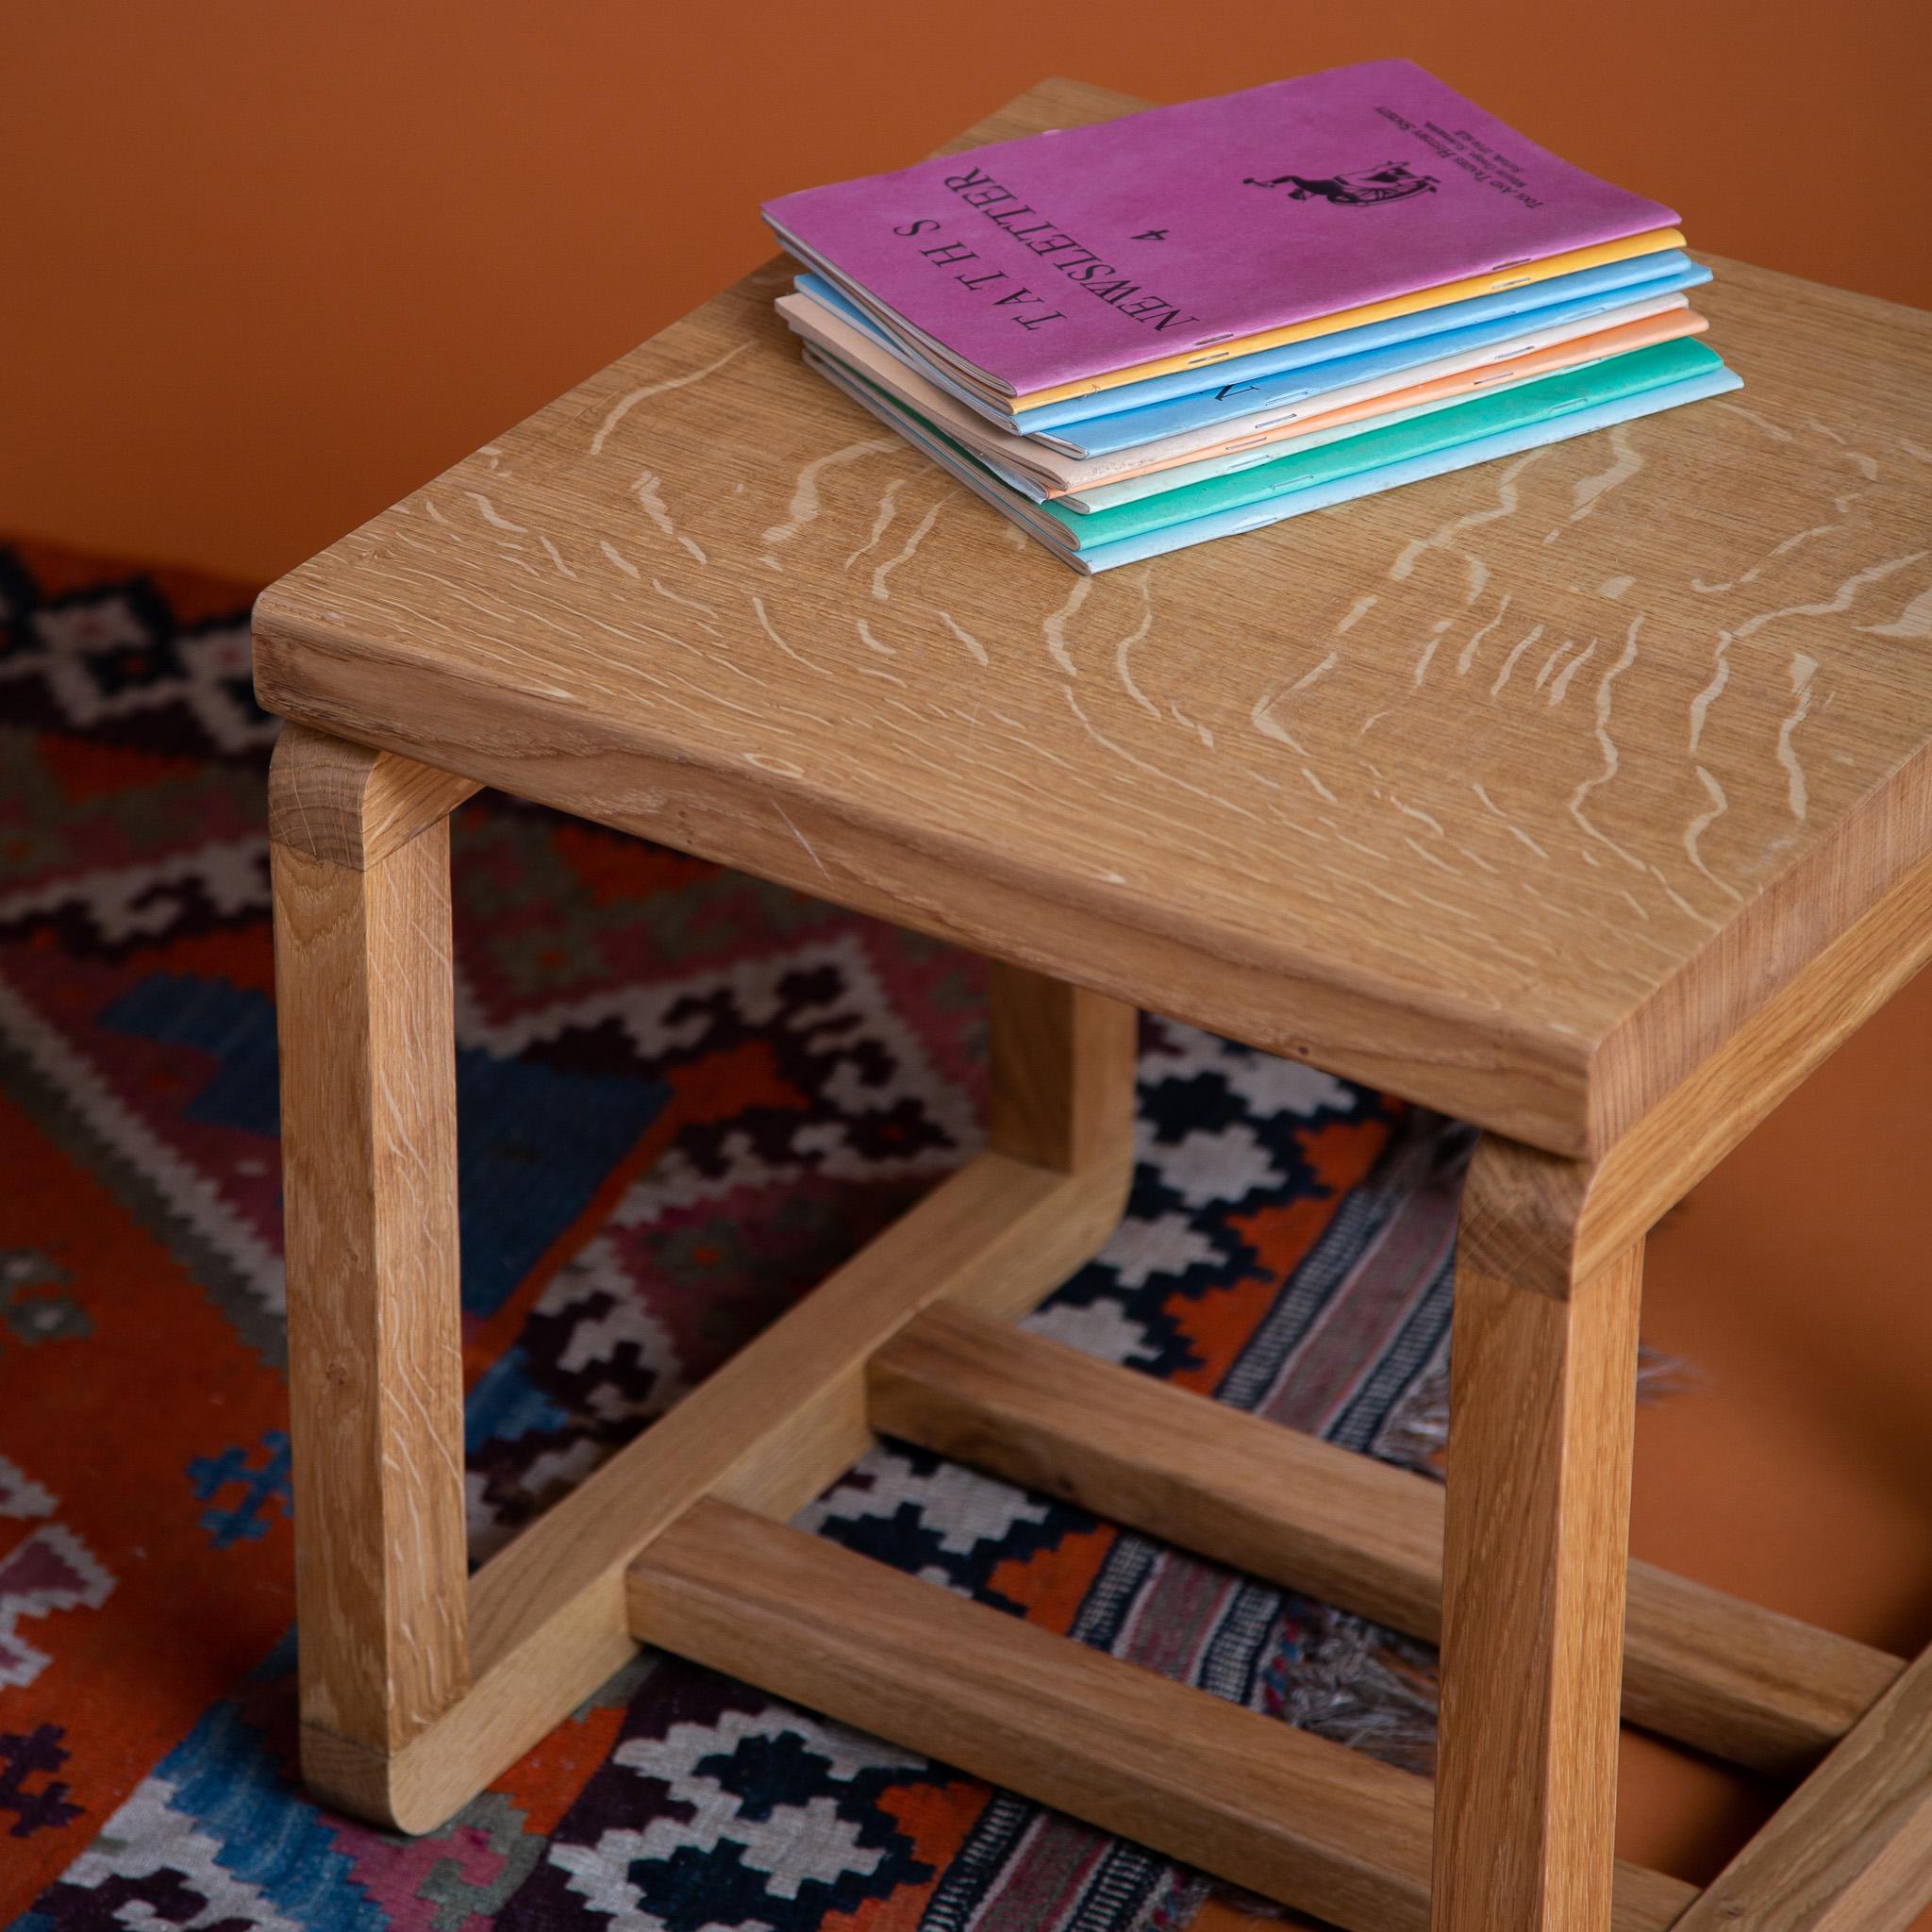 English Oak side table constructed of the highest qualityquarter sawn timber in England with hand carved and shaped corners.
Inspired by the makers love of architecture, this high quality and unique side table is destined to be a future classic.
The